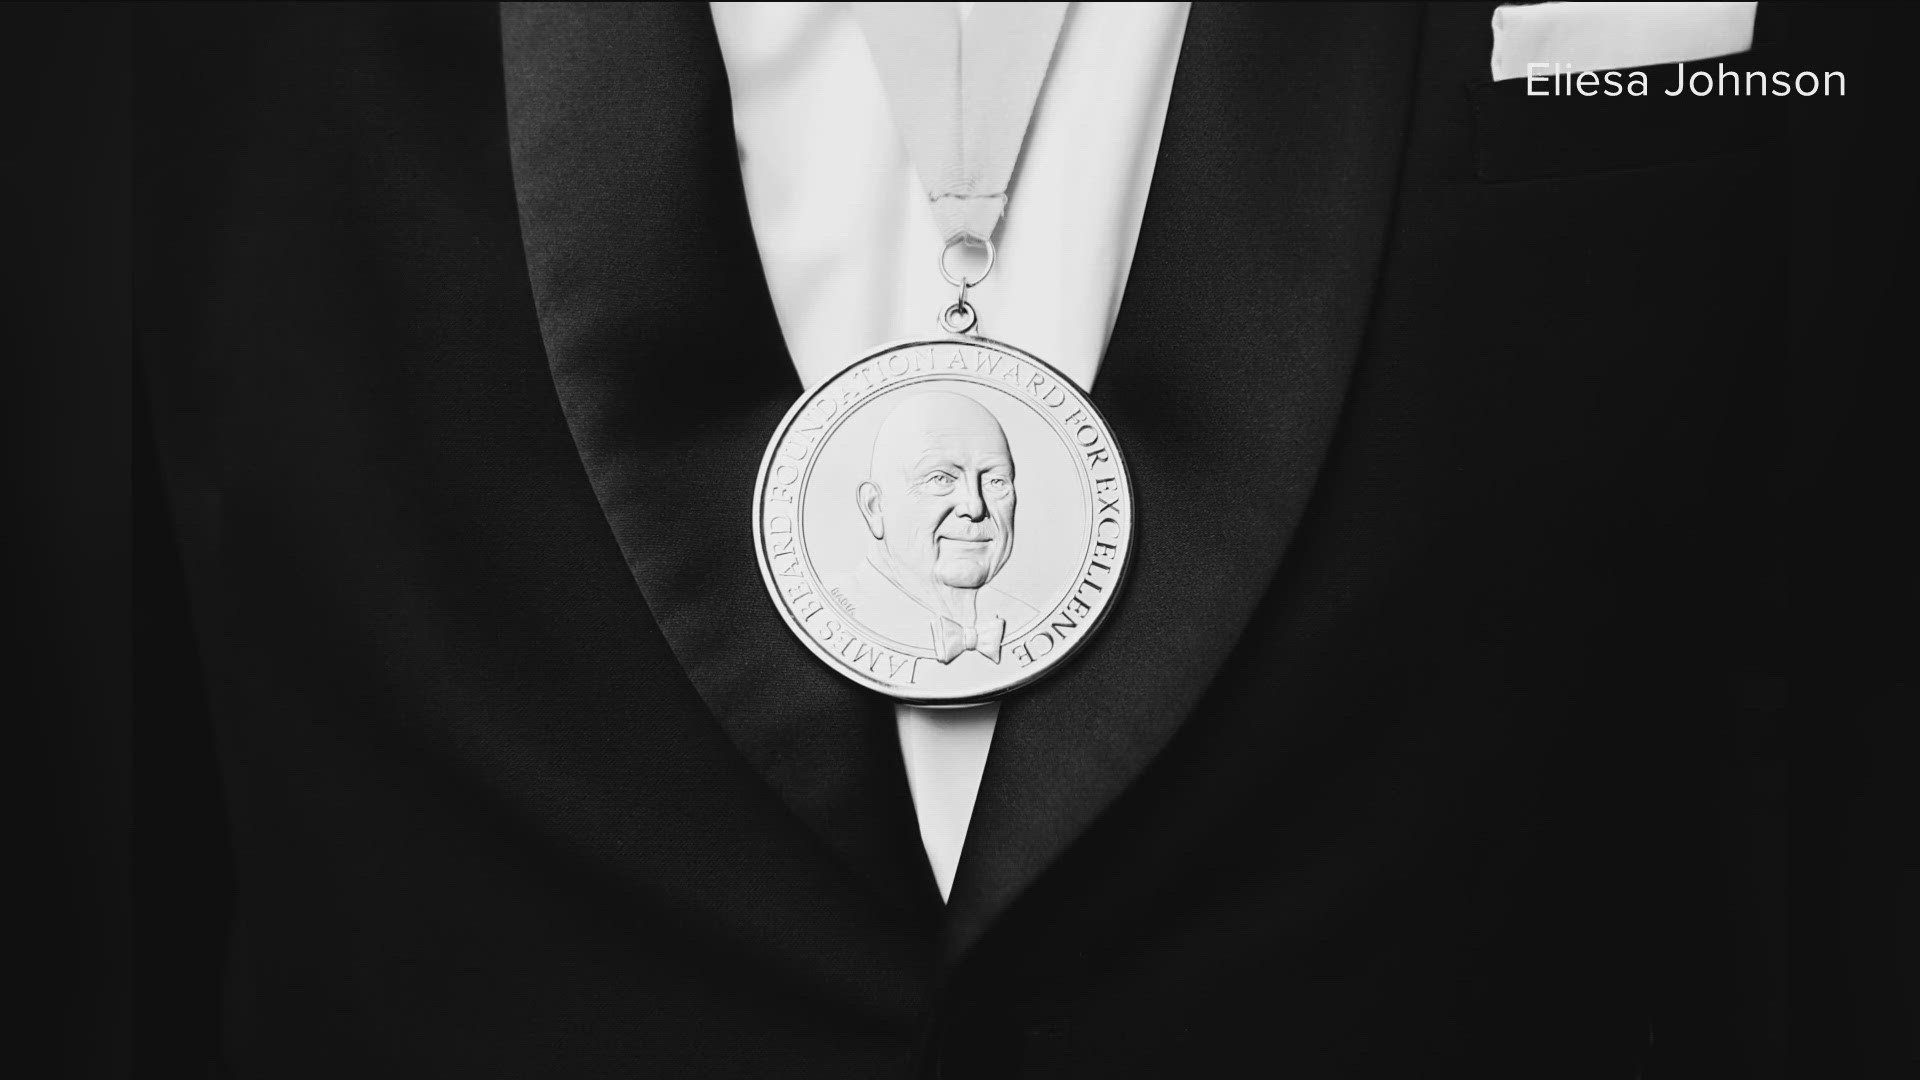 AMONG THE NATION'S MOST PRESTIGIOUS HONORS - THE JAMES BEARD AWARDS RECOGNIZES LEADERS IN THE AMERICAN CULINARY INDUSTRY...